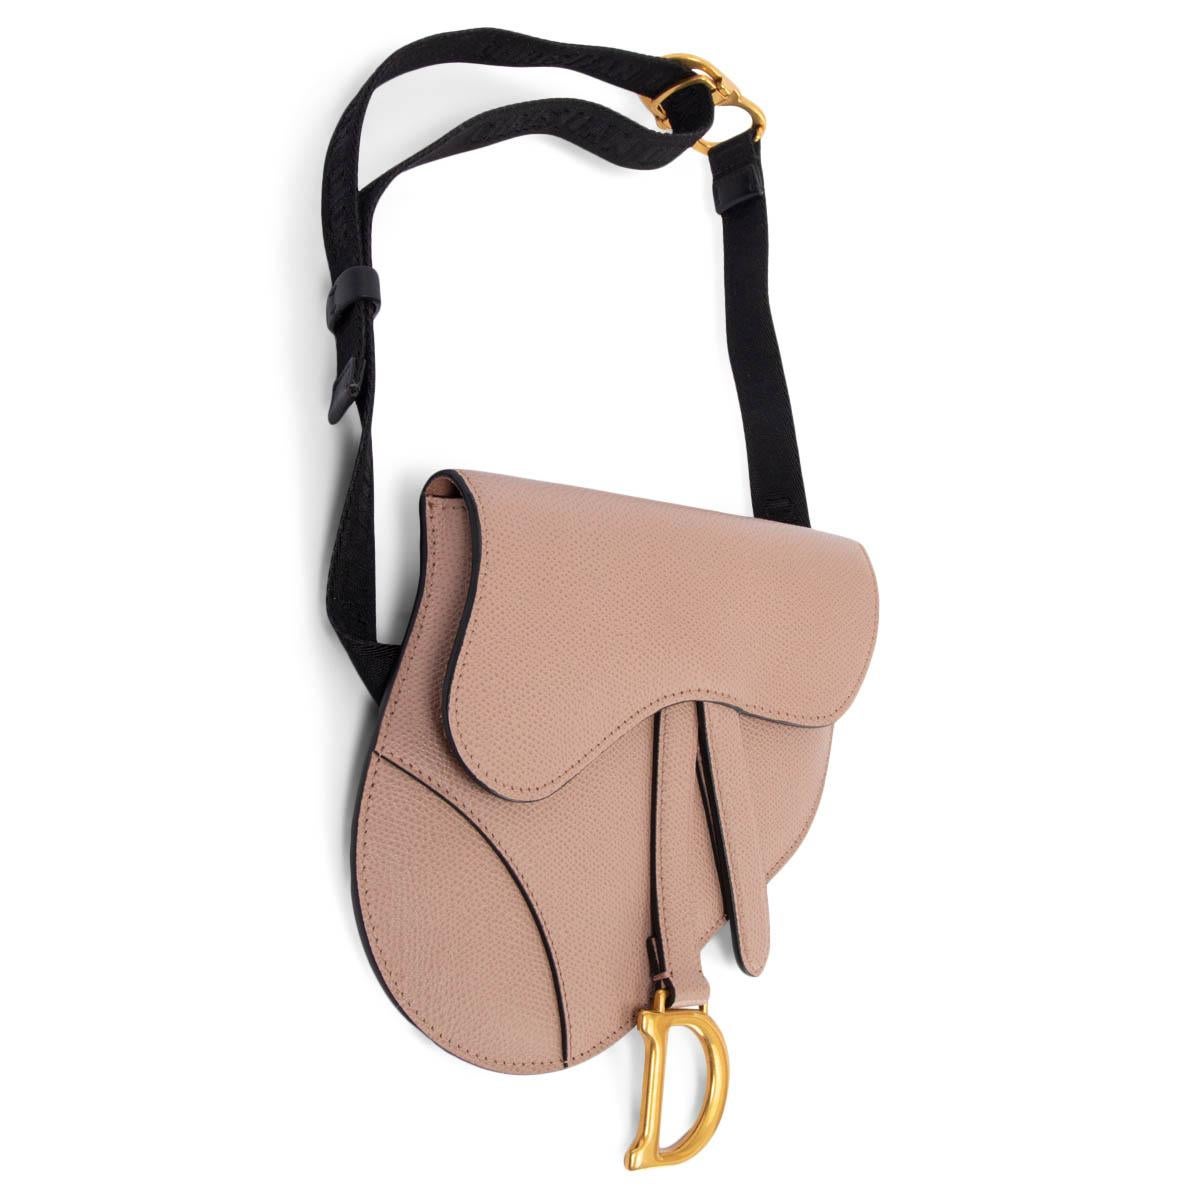 100% authentic Christian Dior Saddle belt pouch in grained powder pink calfskin with gold-tone CD clasp detail on the black nylon logo belt strap. The legendary design features a Saddle flap with a magnetic 'D' stirrup clasp and a back pocket. Lined